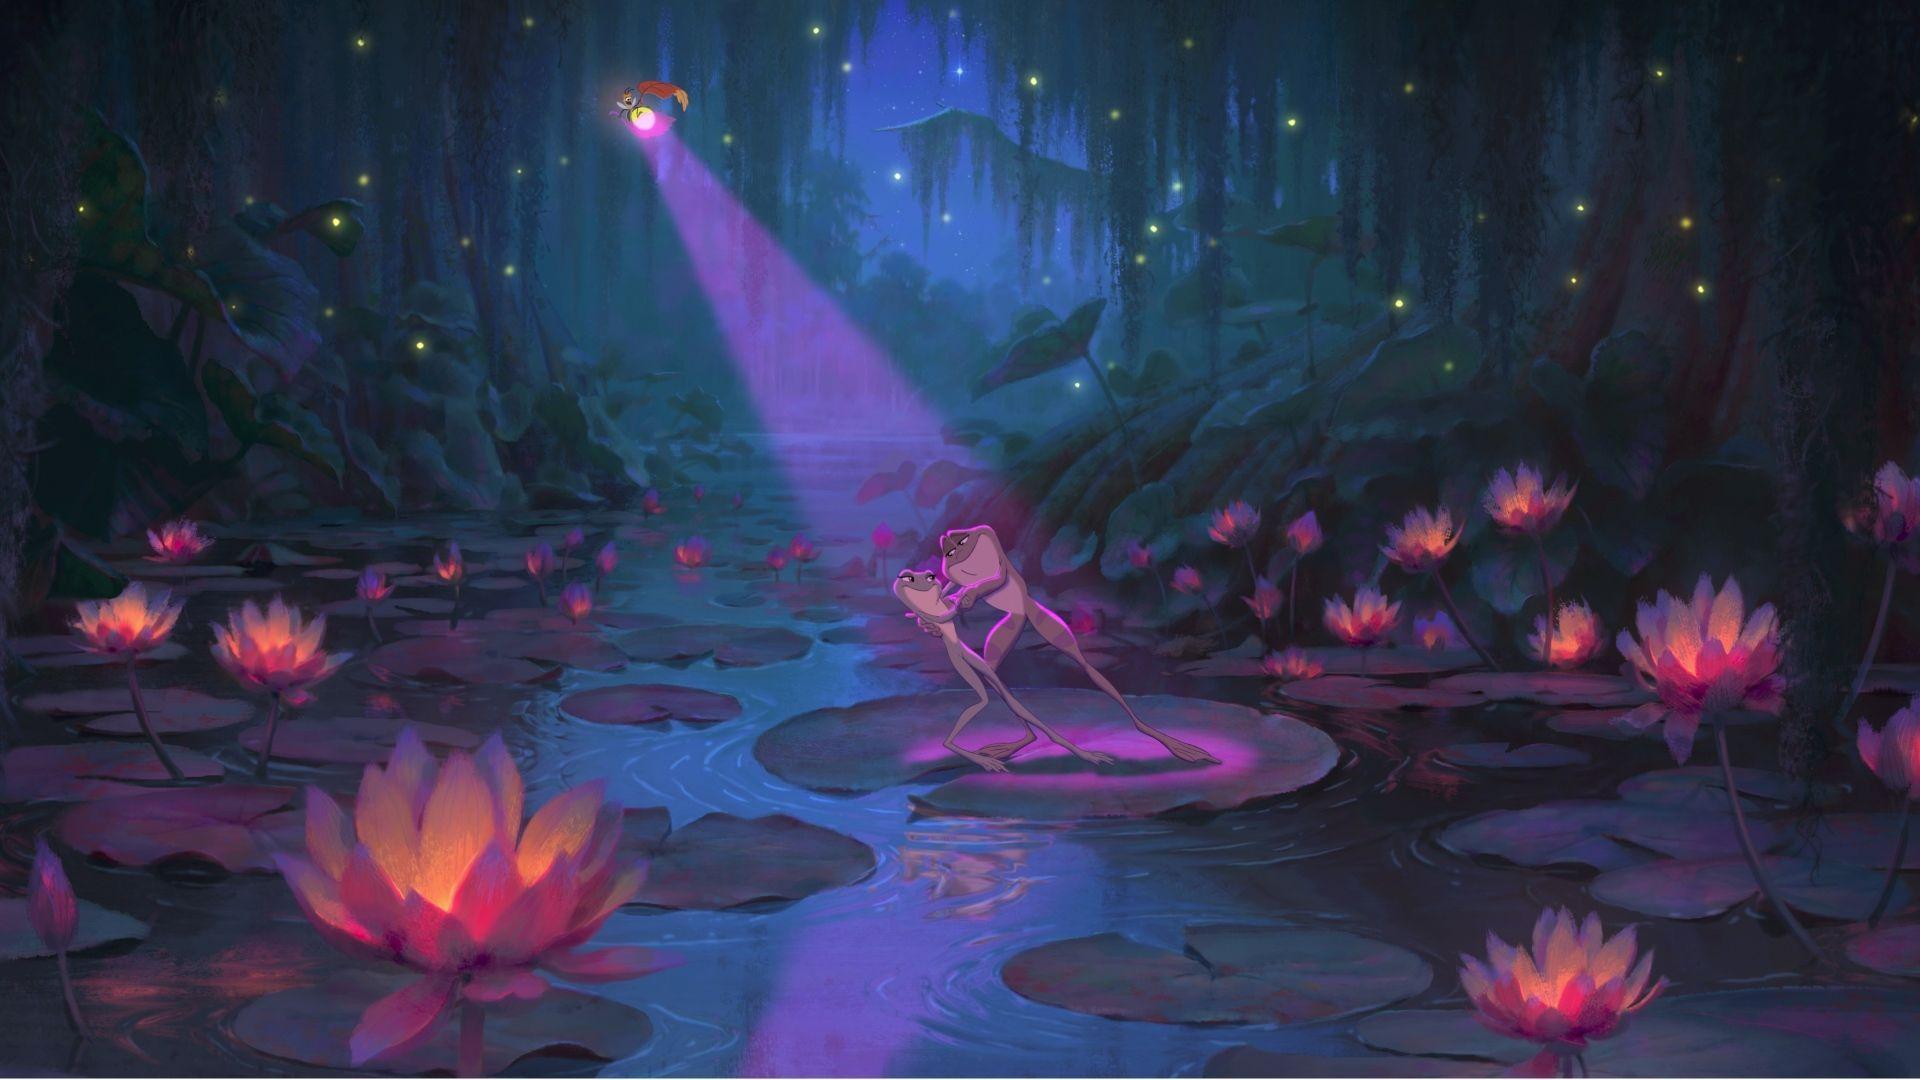 Download Wallpaper 1920x1080 The princess and the frog, Frog